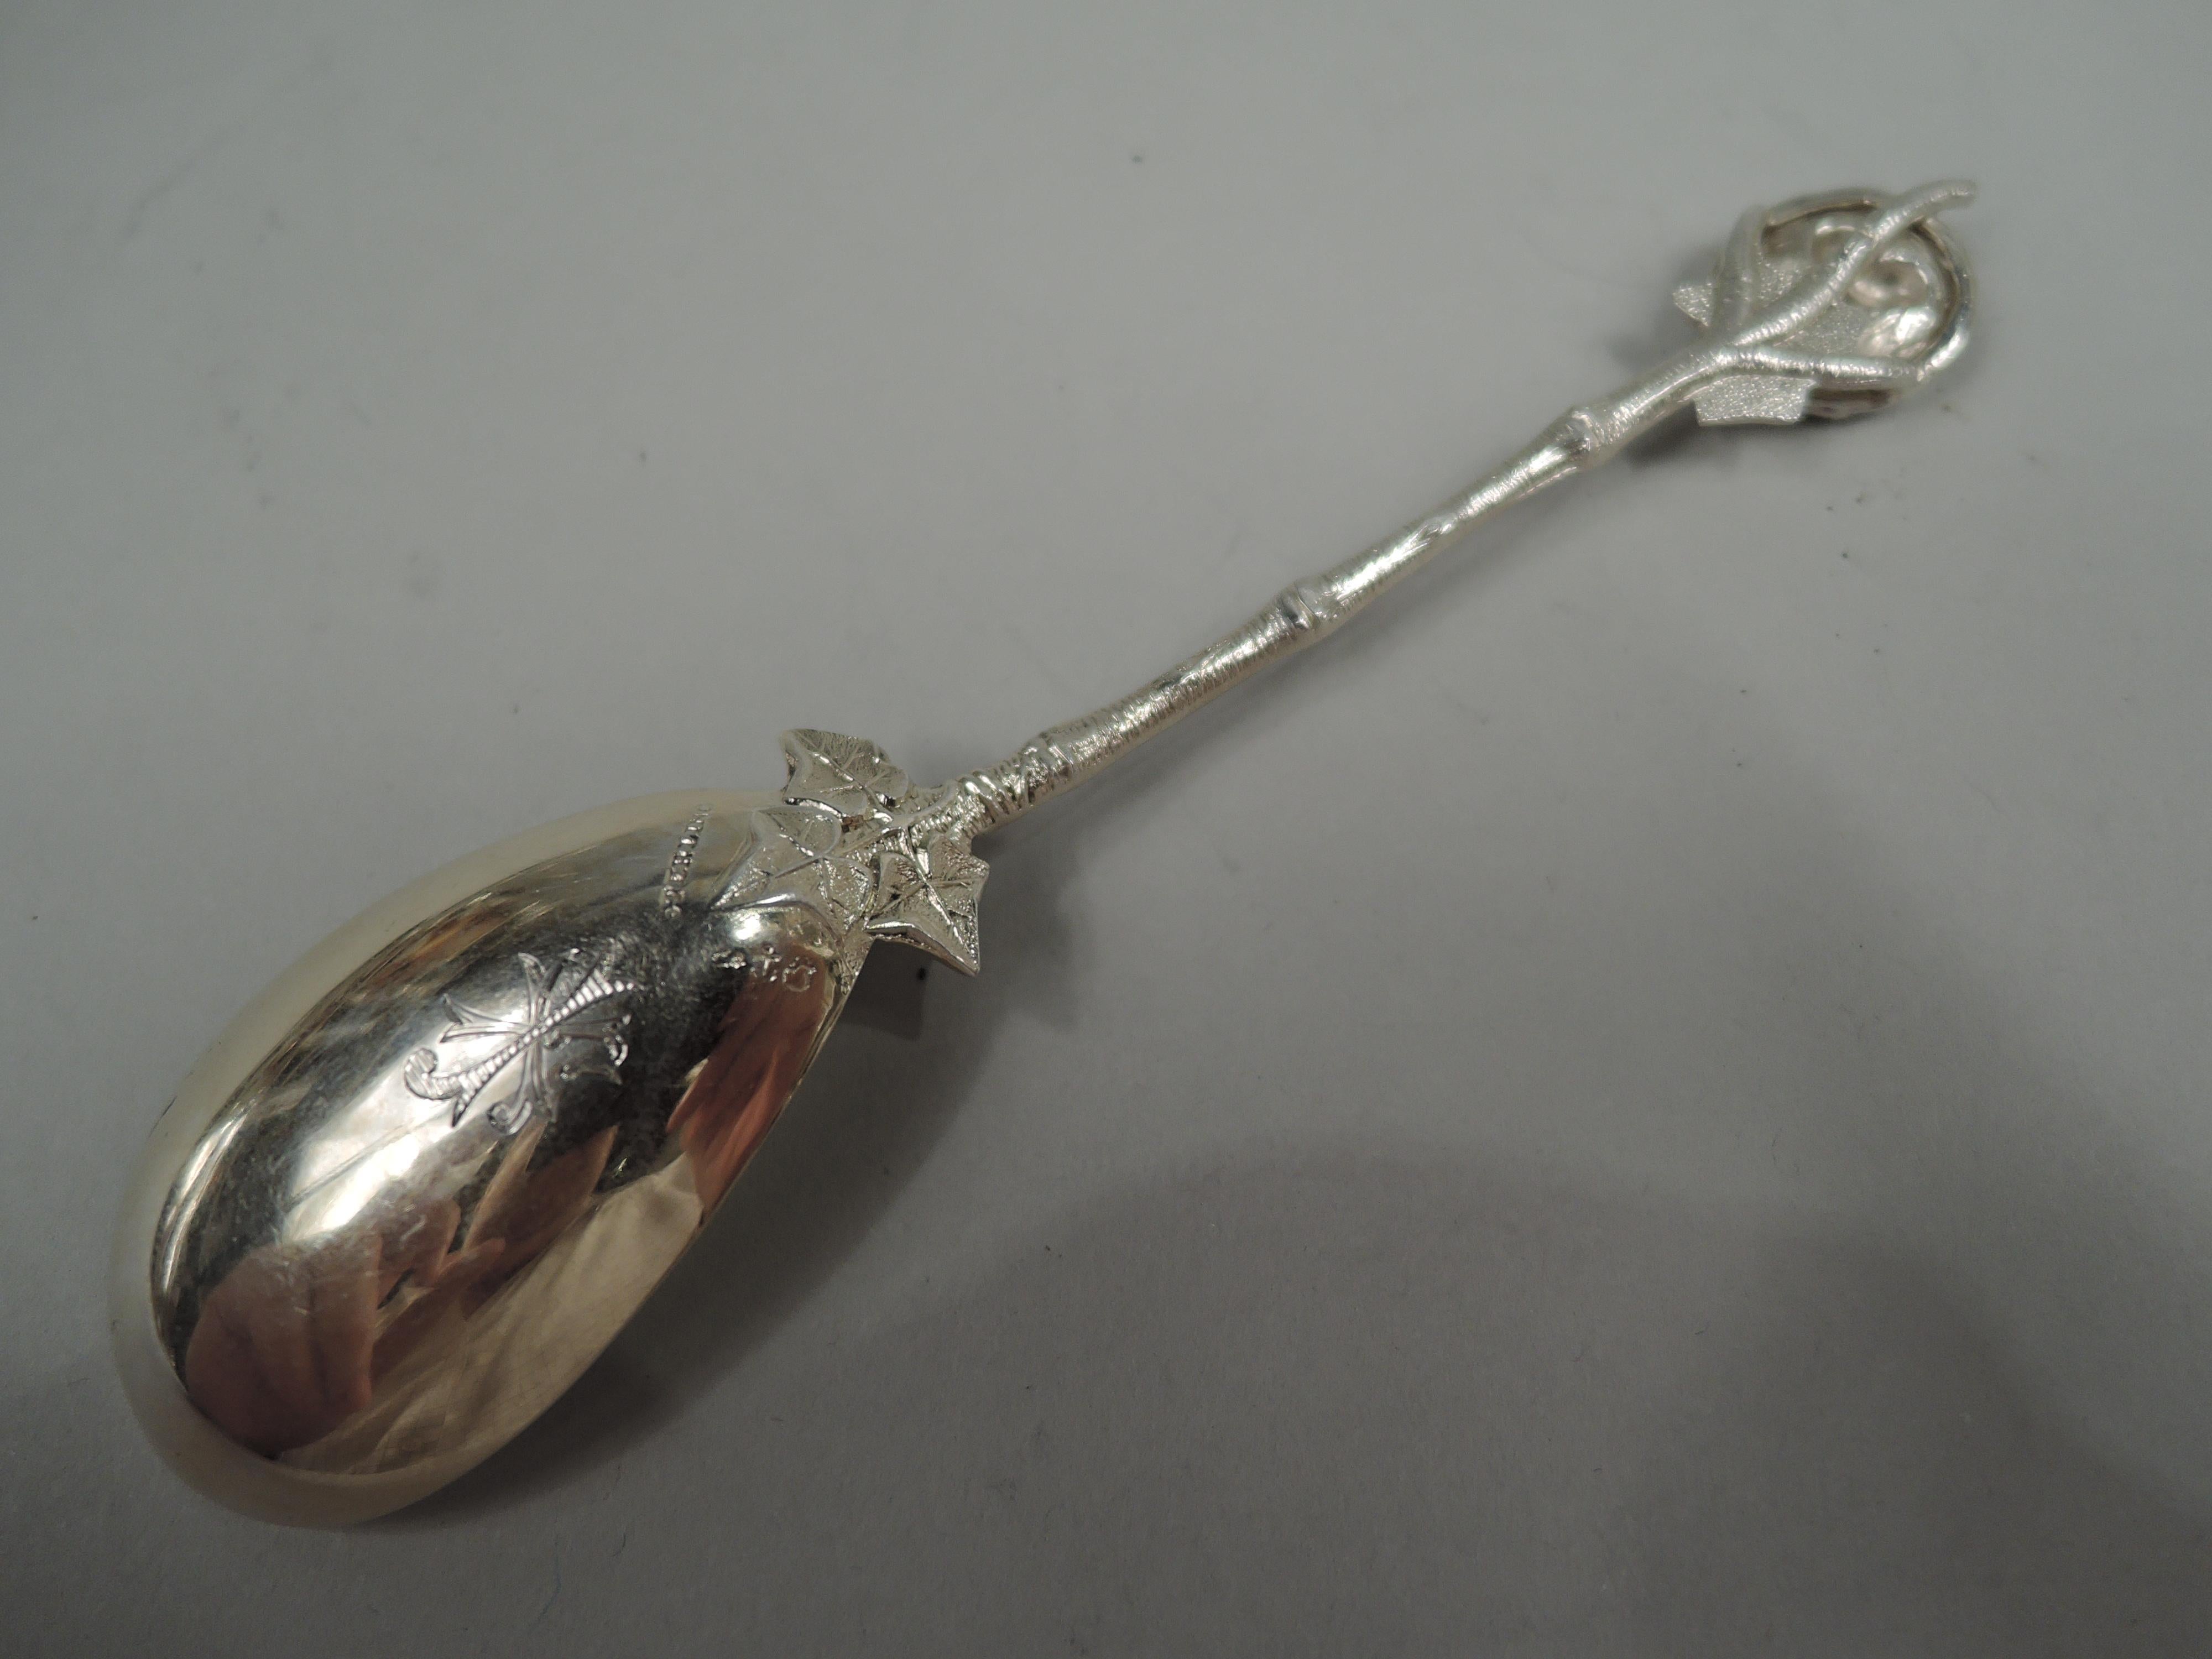 Bird’s Nest sterling silver egg spoon. Made by Gorham in Providence, ca 1880. Leafing twig stem and nest terminal lain with 3 eggs. Bowl elongated oval and gilt with monogram engraved on verso. Marks include maker’s stamp from last quarter of 19th